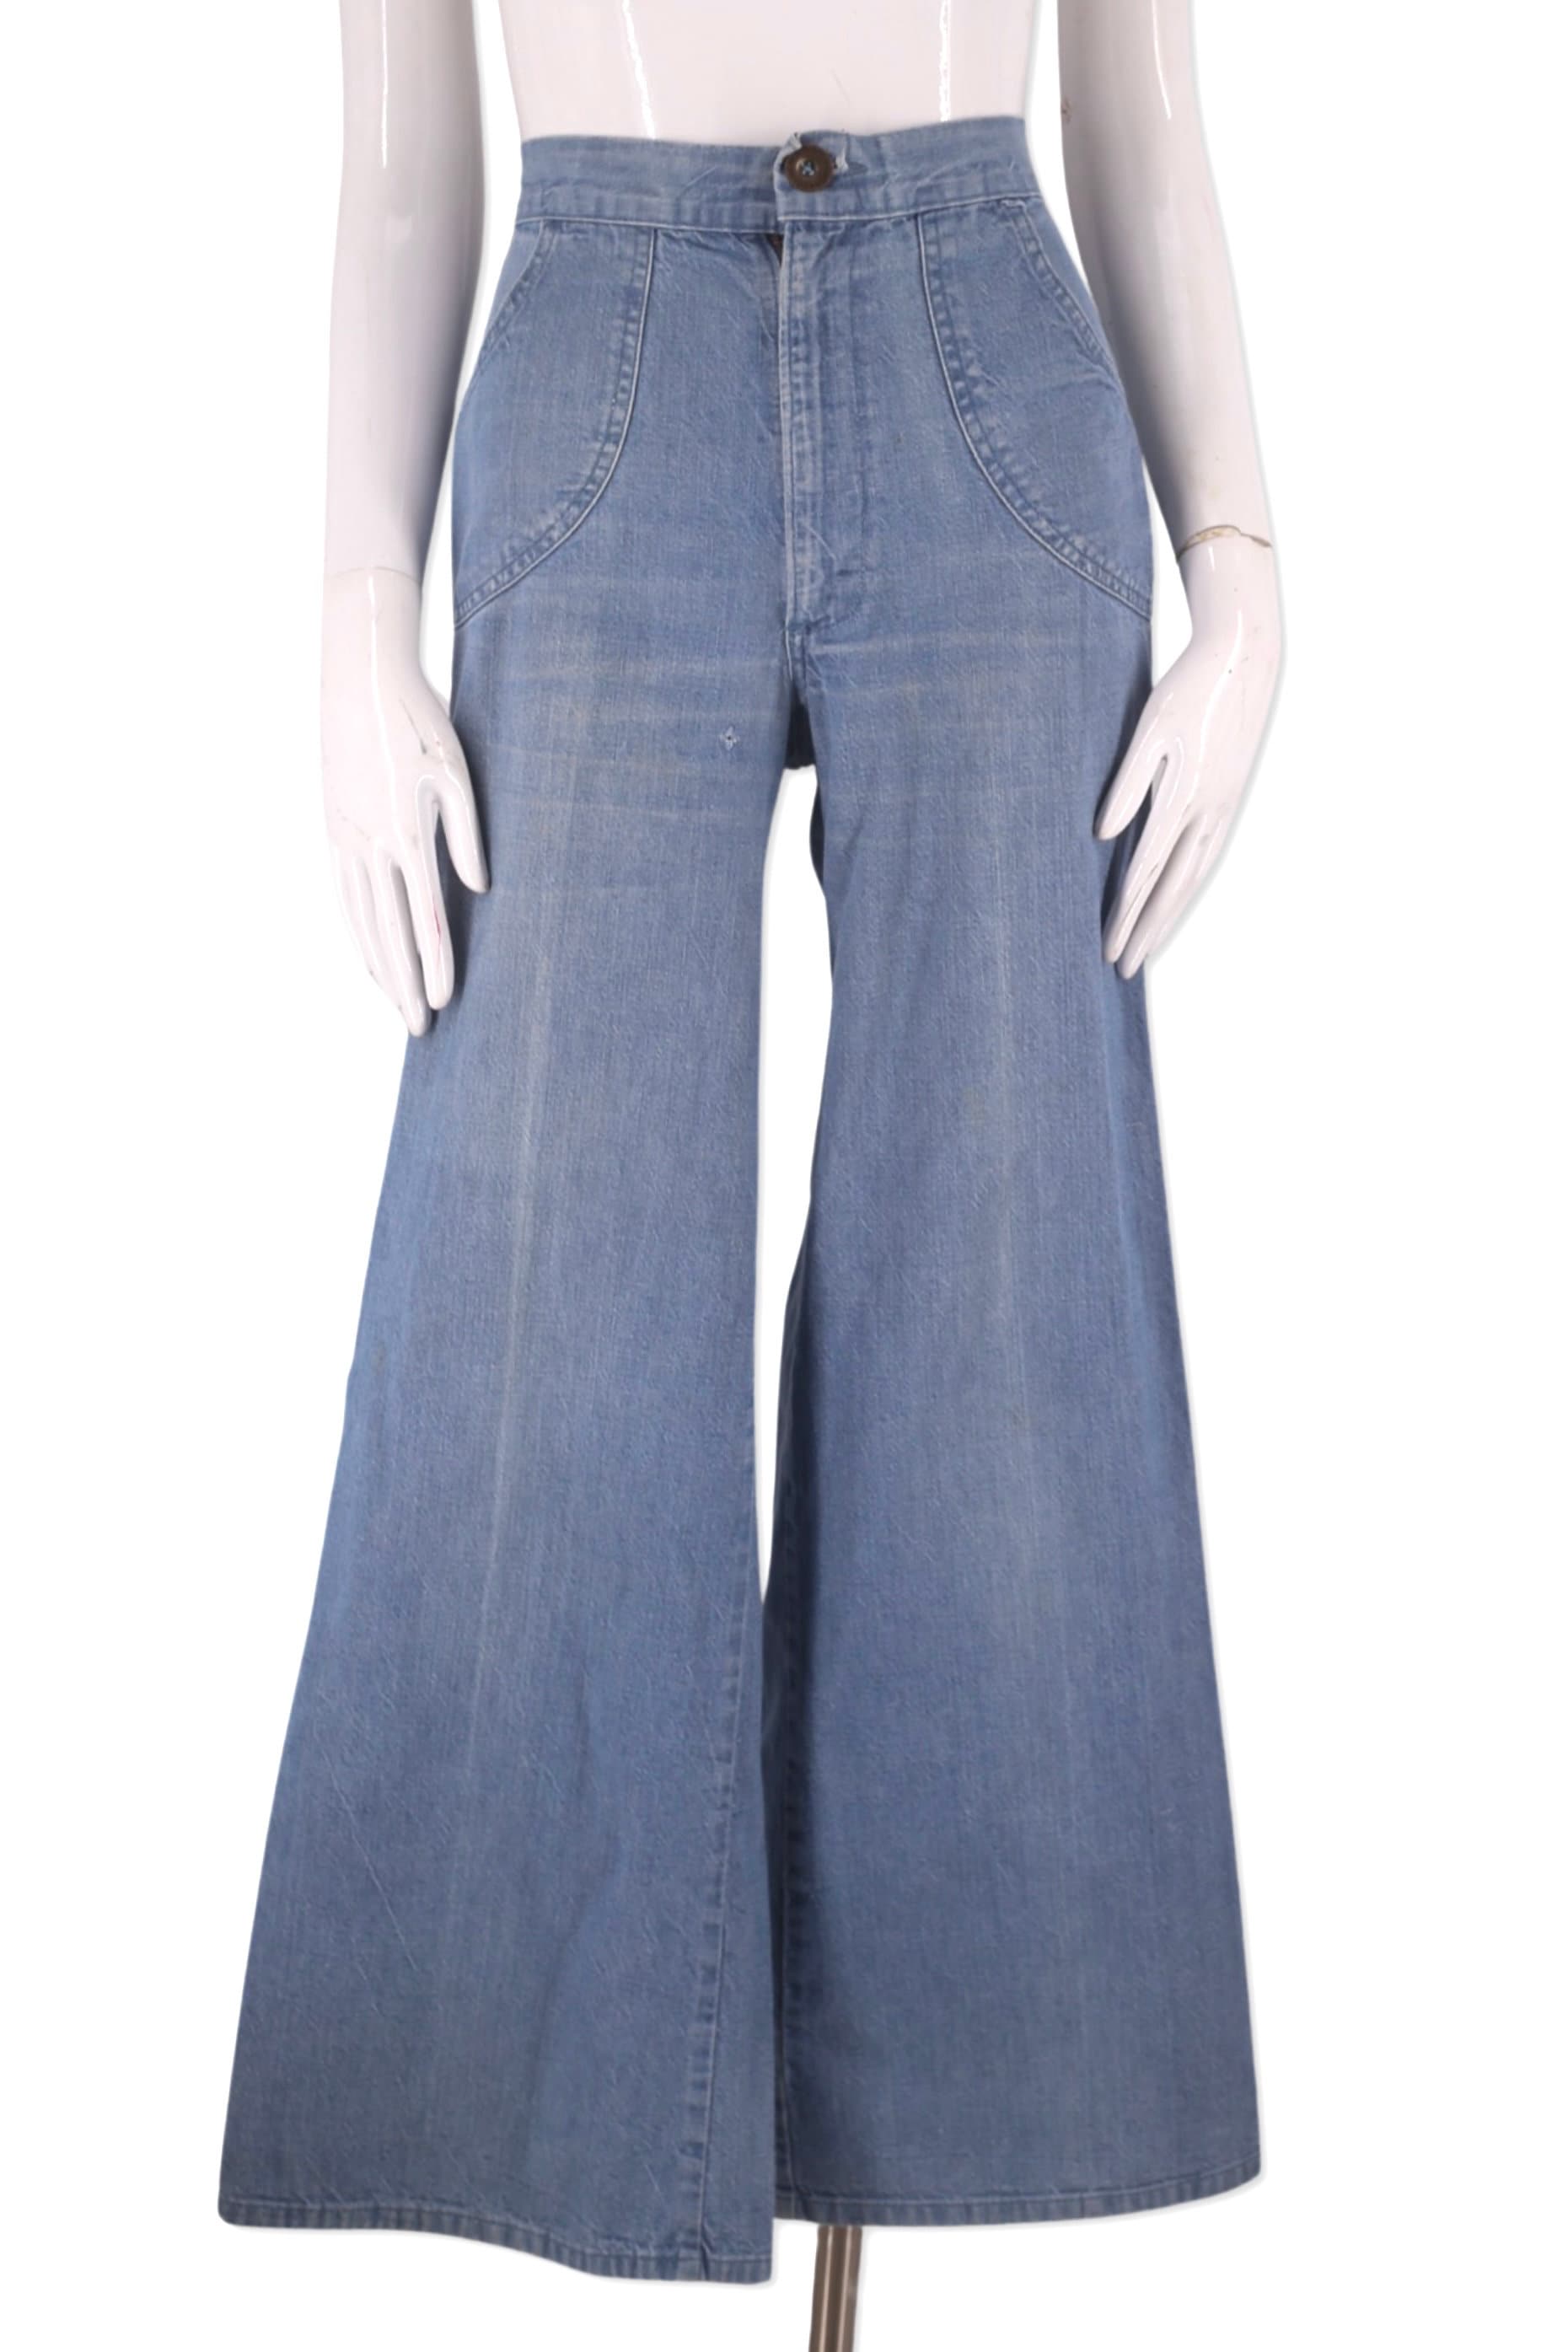 70s Faded Bell Bottom Jeans 30x30.5 / Vintage 1970s Faded Hip Hugger  Elephant Bellbottom Jeans / 1970s 30 31 Waist Flared Jeans